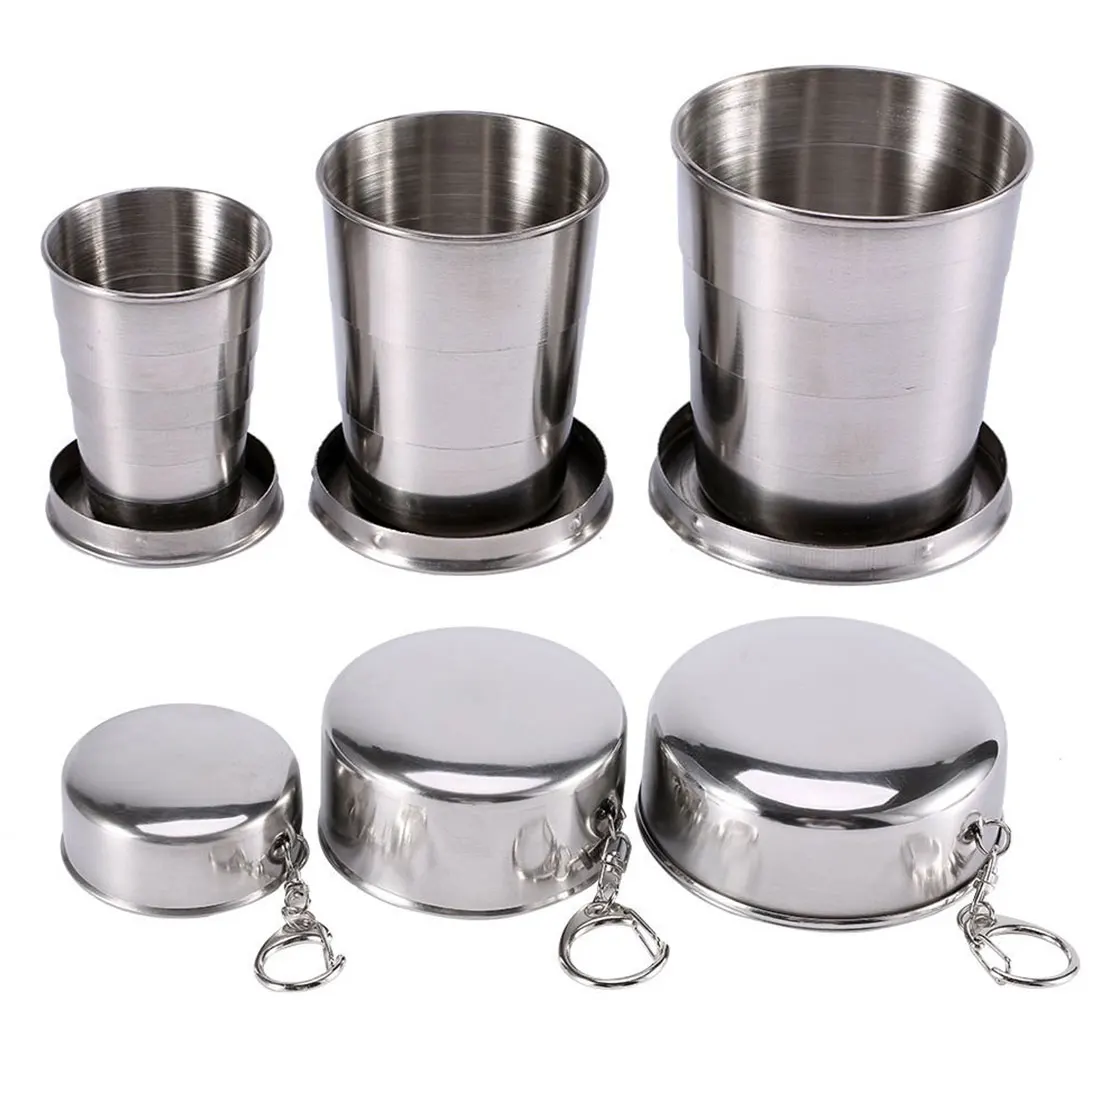 

Household 60ml 150ml 250ml Stainless Steel Camping Folding Cup Portable Outdoor Travel Demountable Collapsible Cup With Keychain